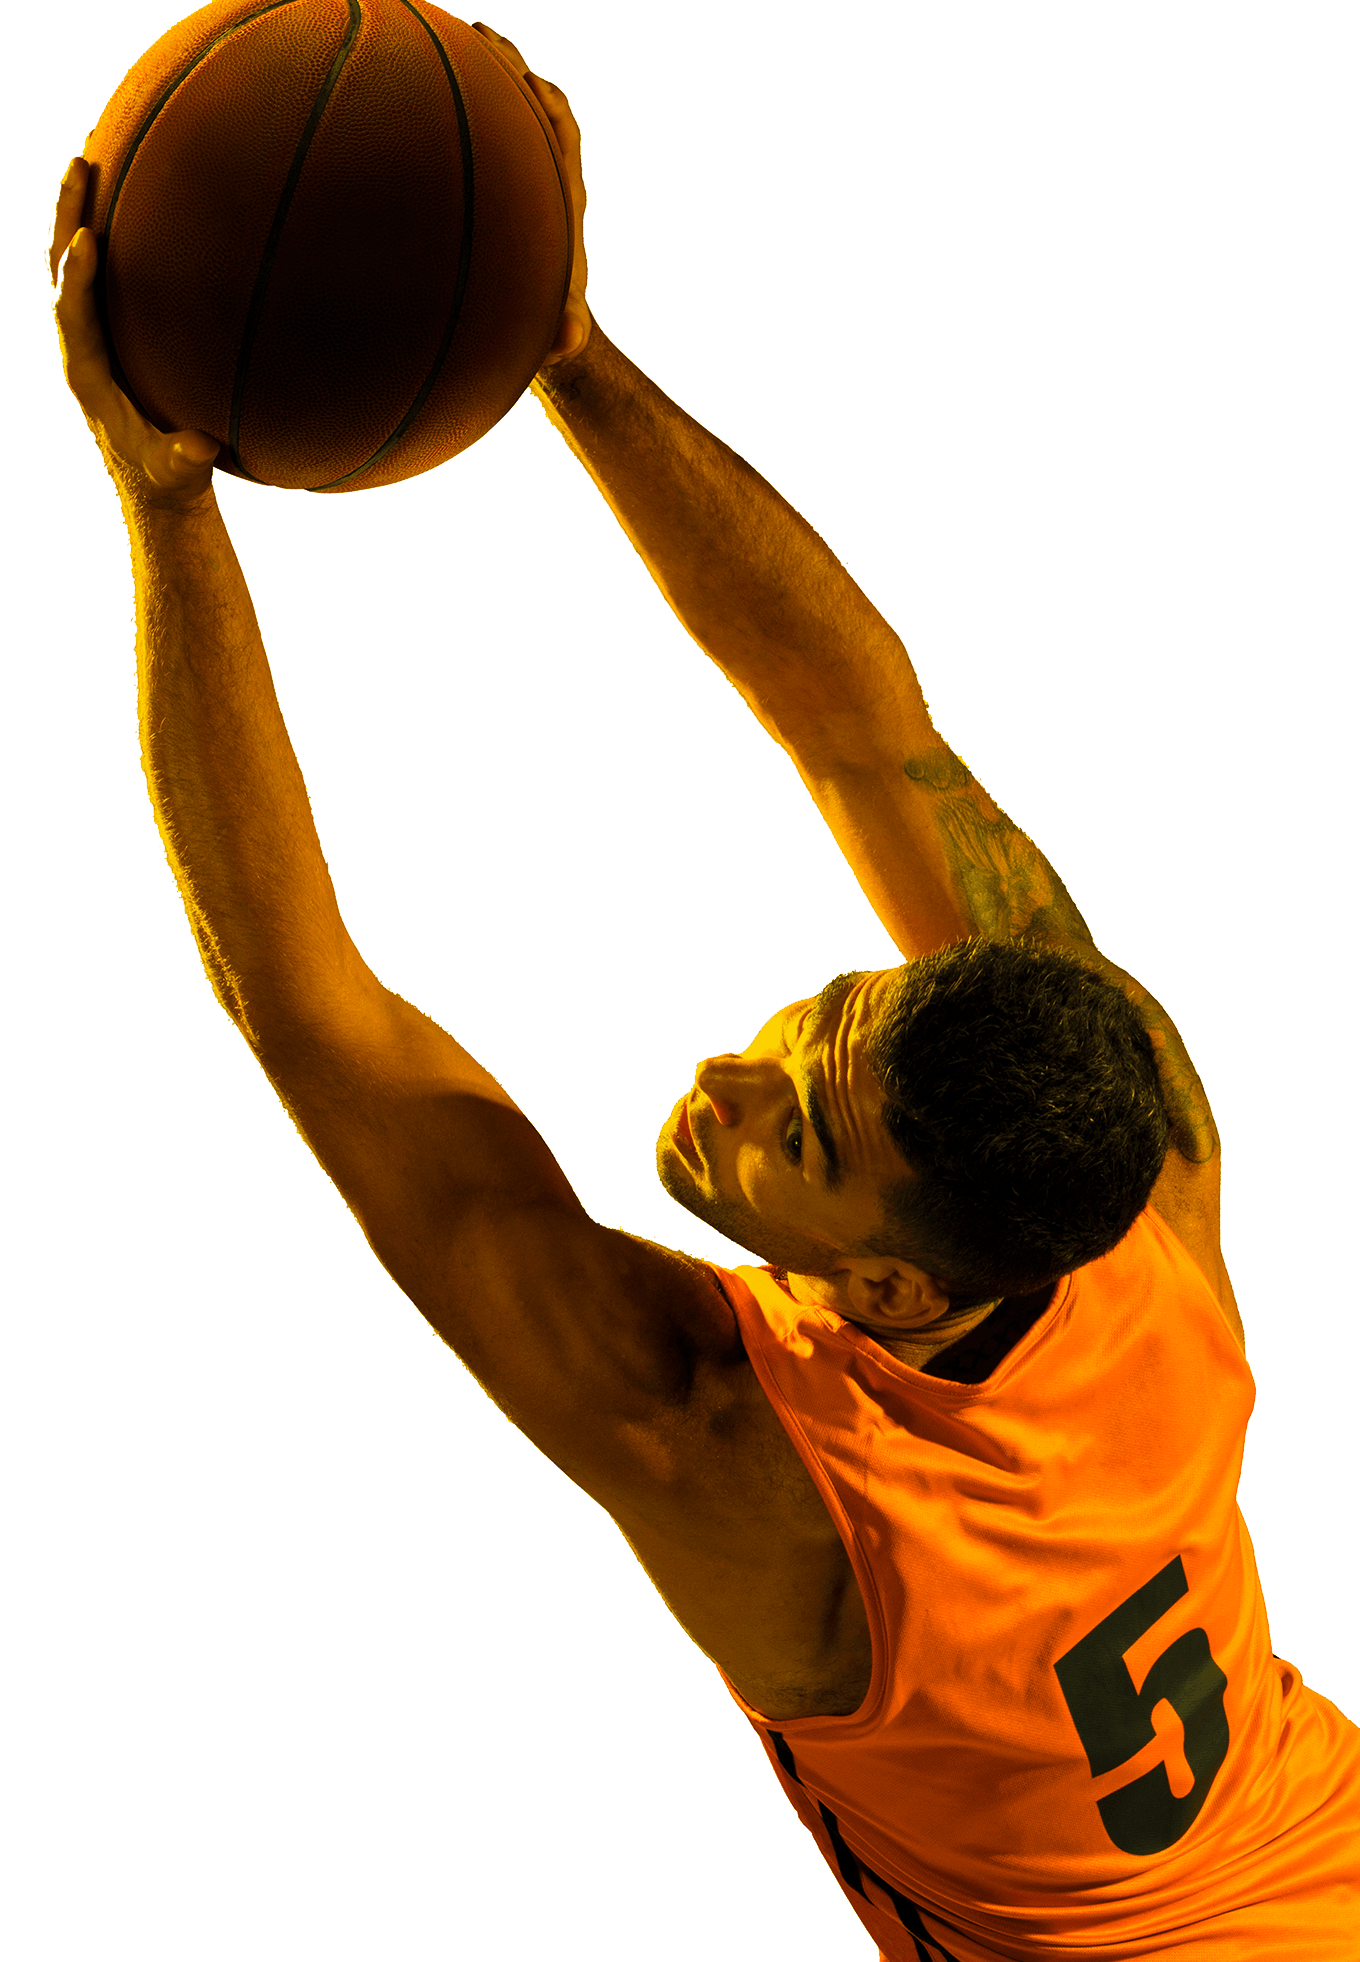 In the the picture there is a male basketball player extending his arms holding a ball. He is wearing an orange t-shirt with the number 5 written on his back.